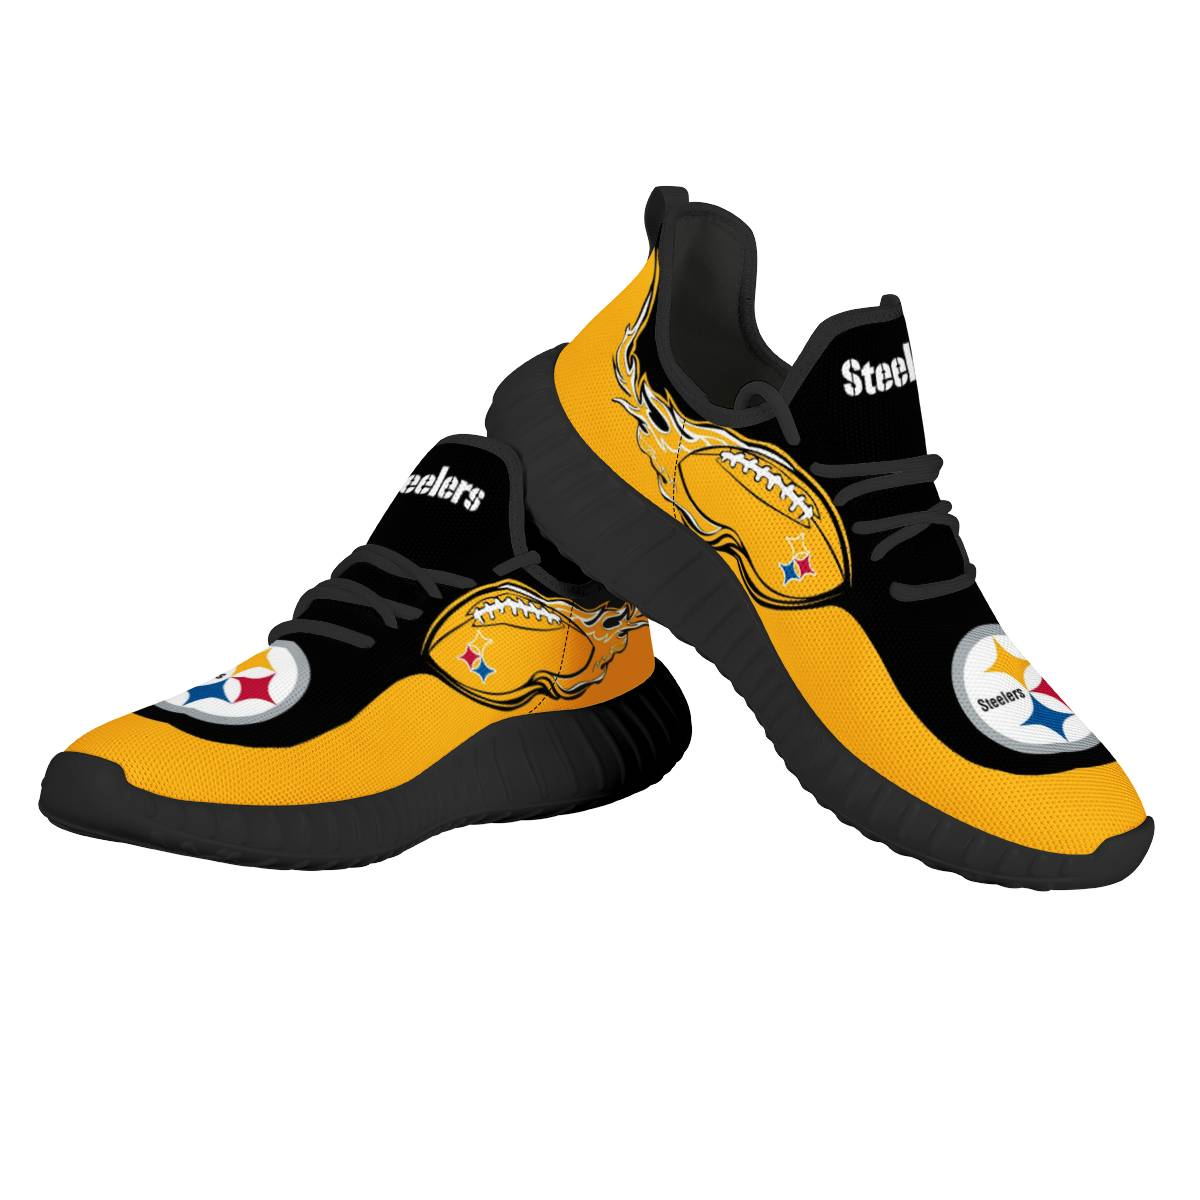 Men's NFL Pittsburgh Steelers Mesh Knit Sneakers/Shoes 009